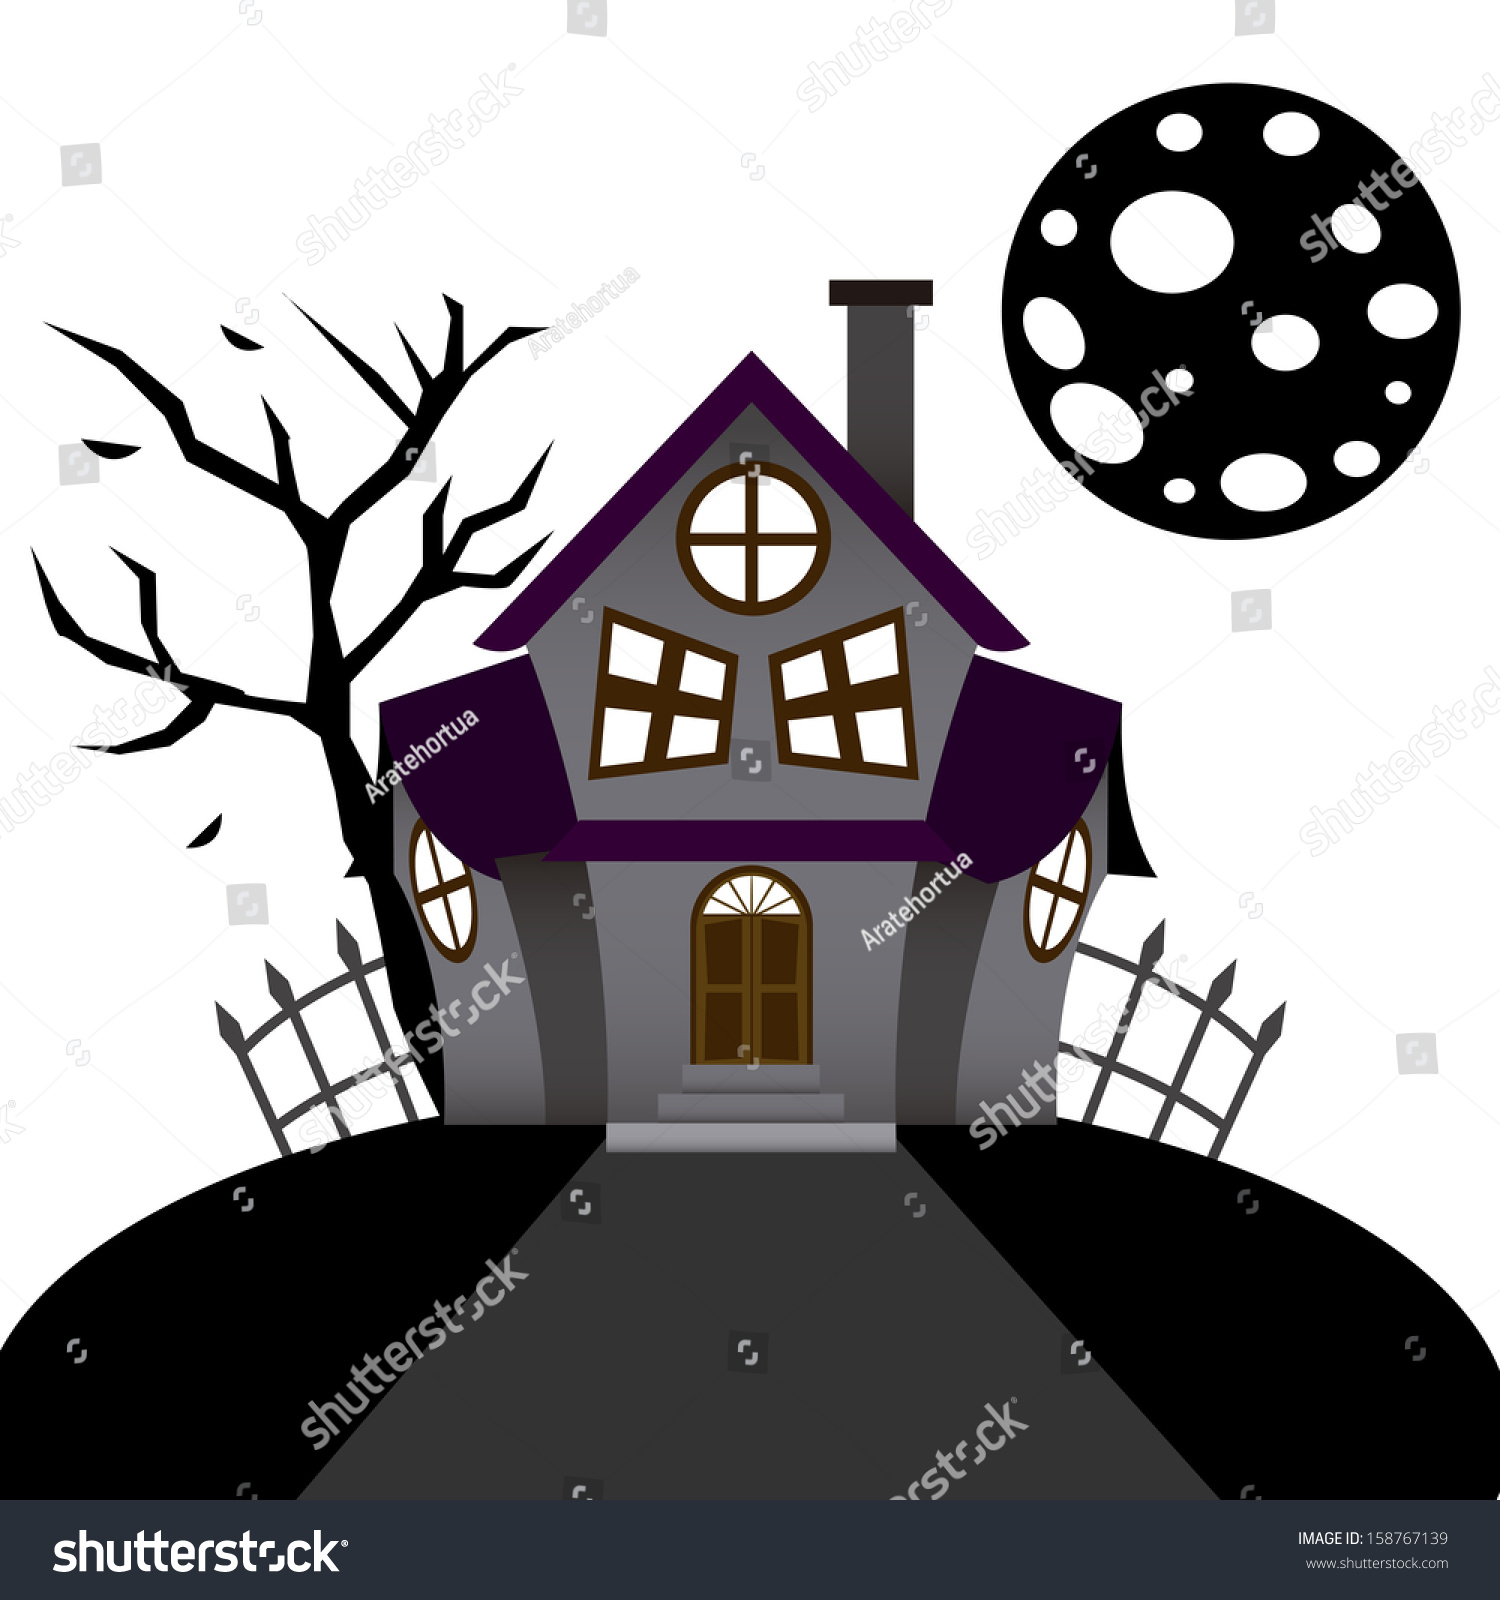 funny house clipart - photo #33